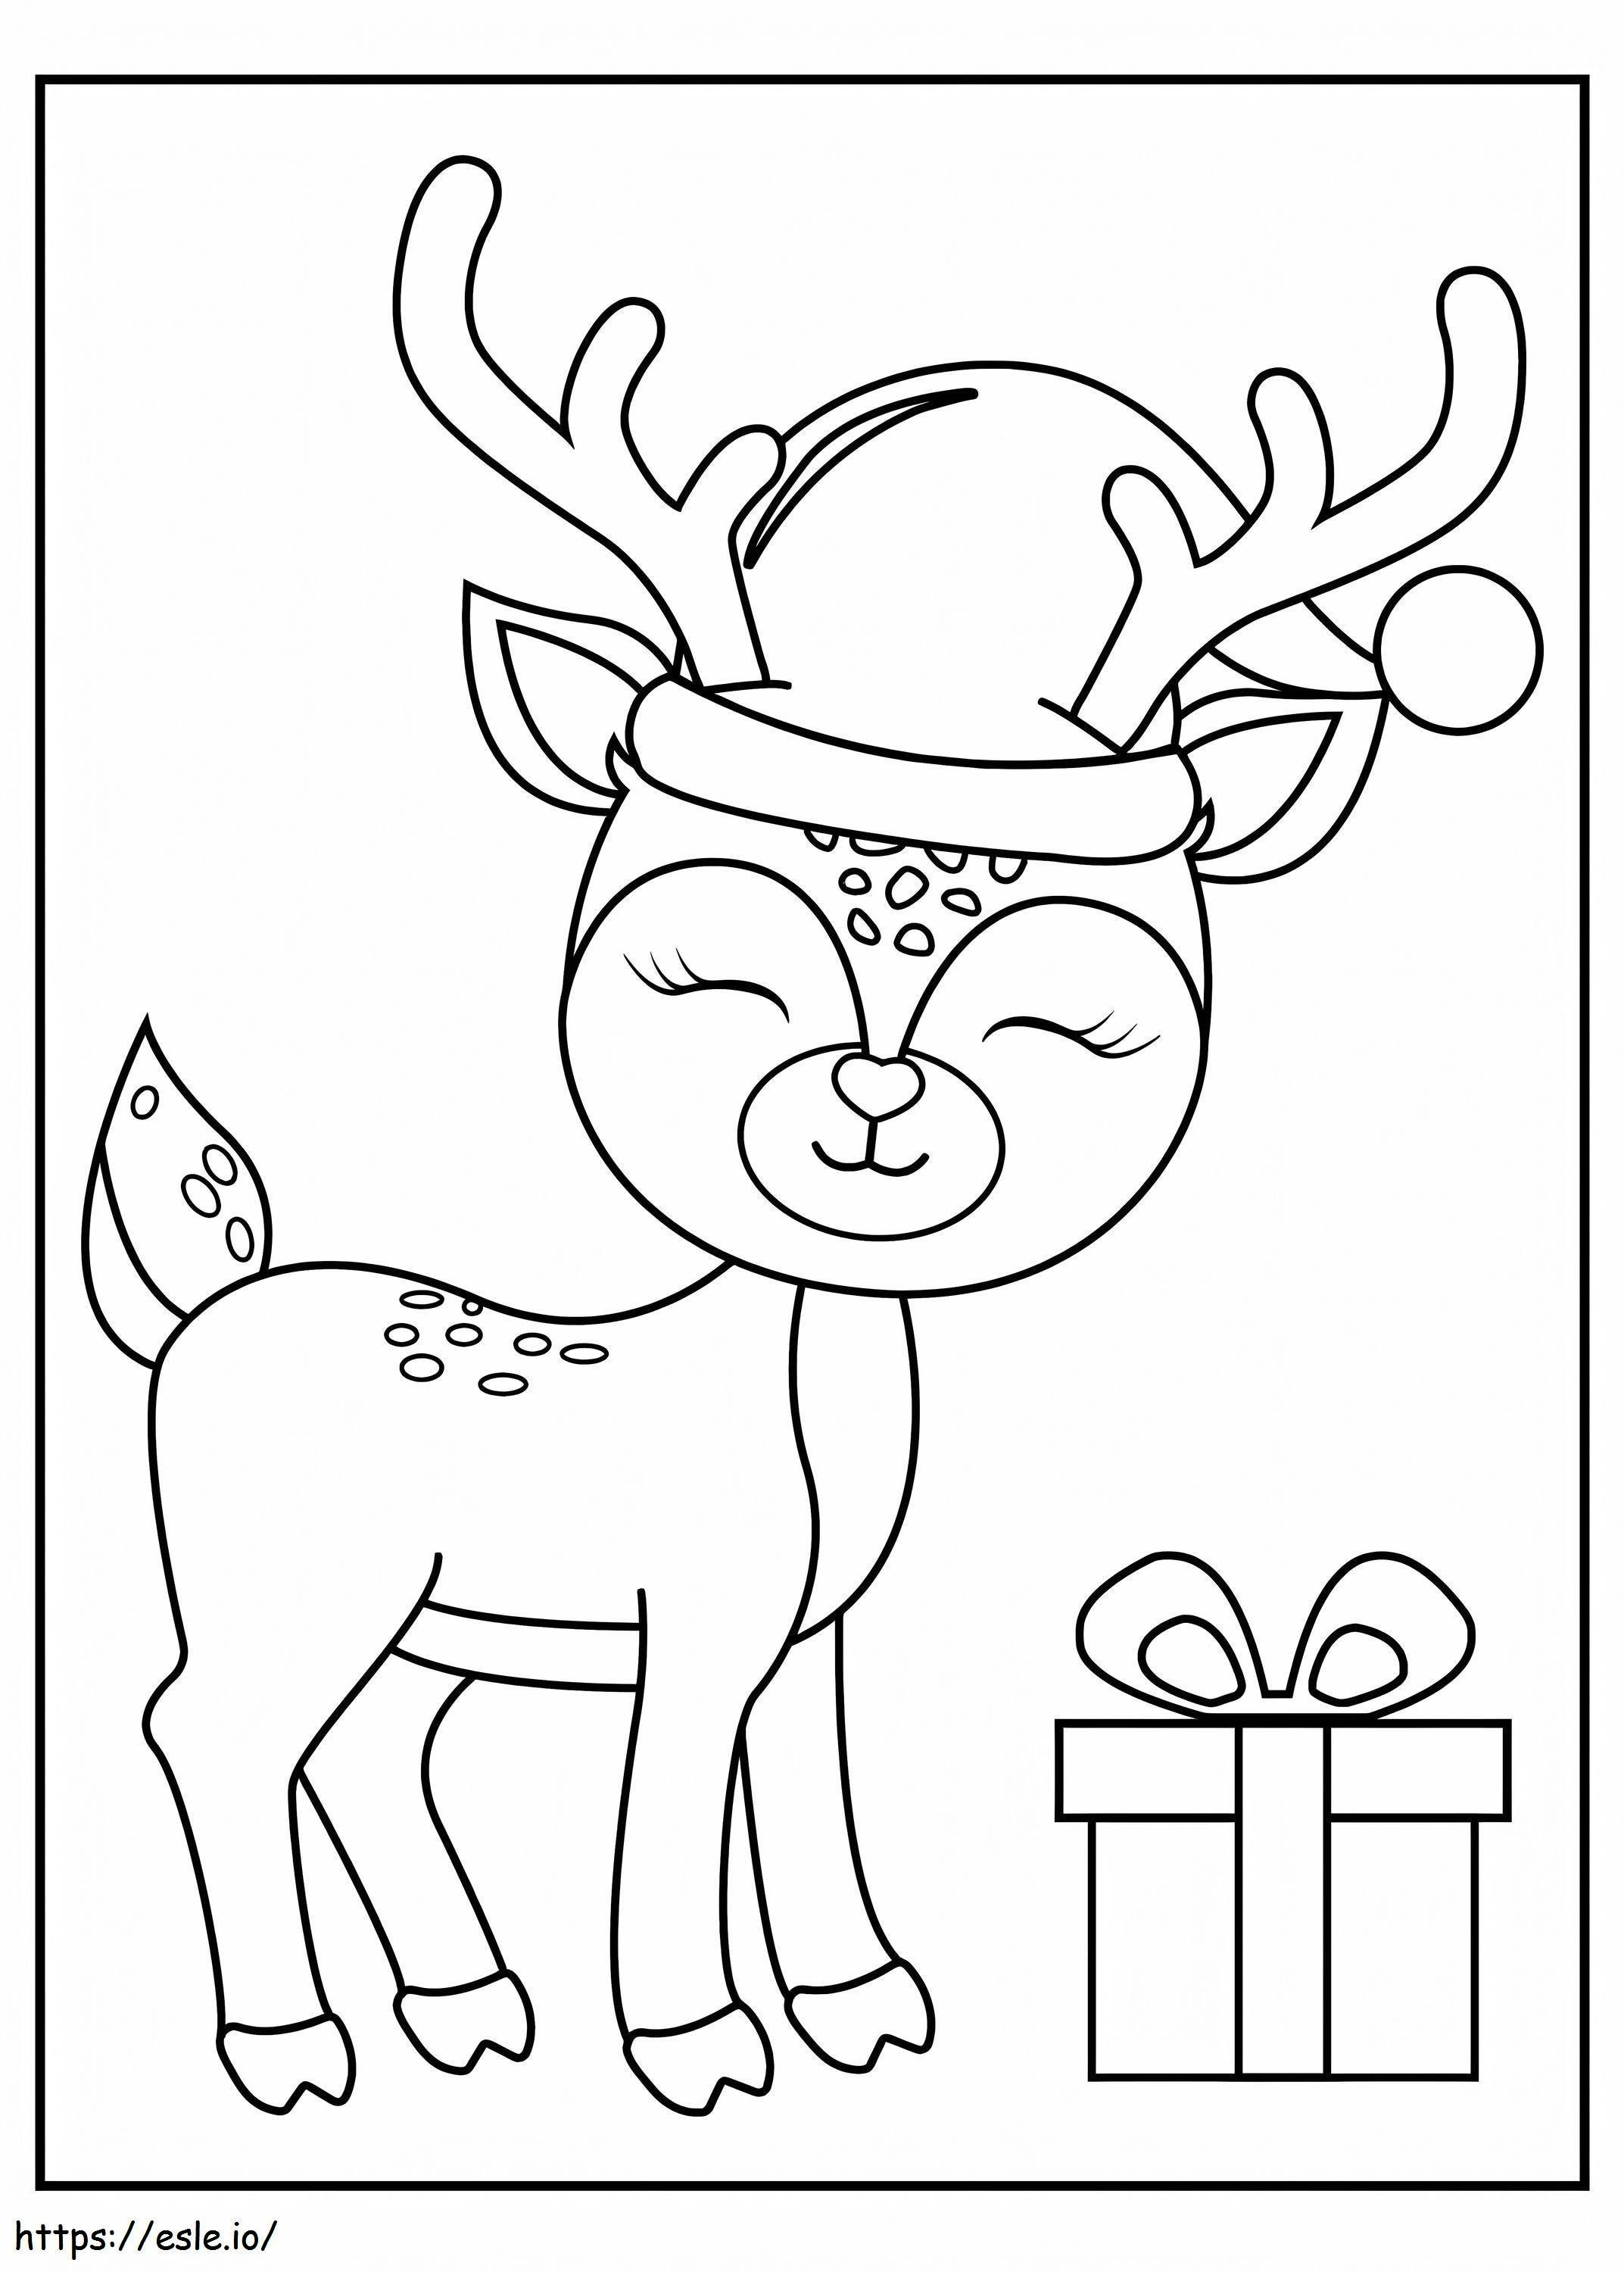 Christmas Reindeer And Gift Box coloring page